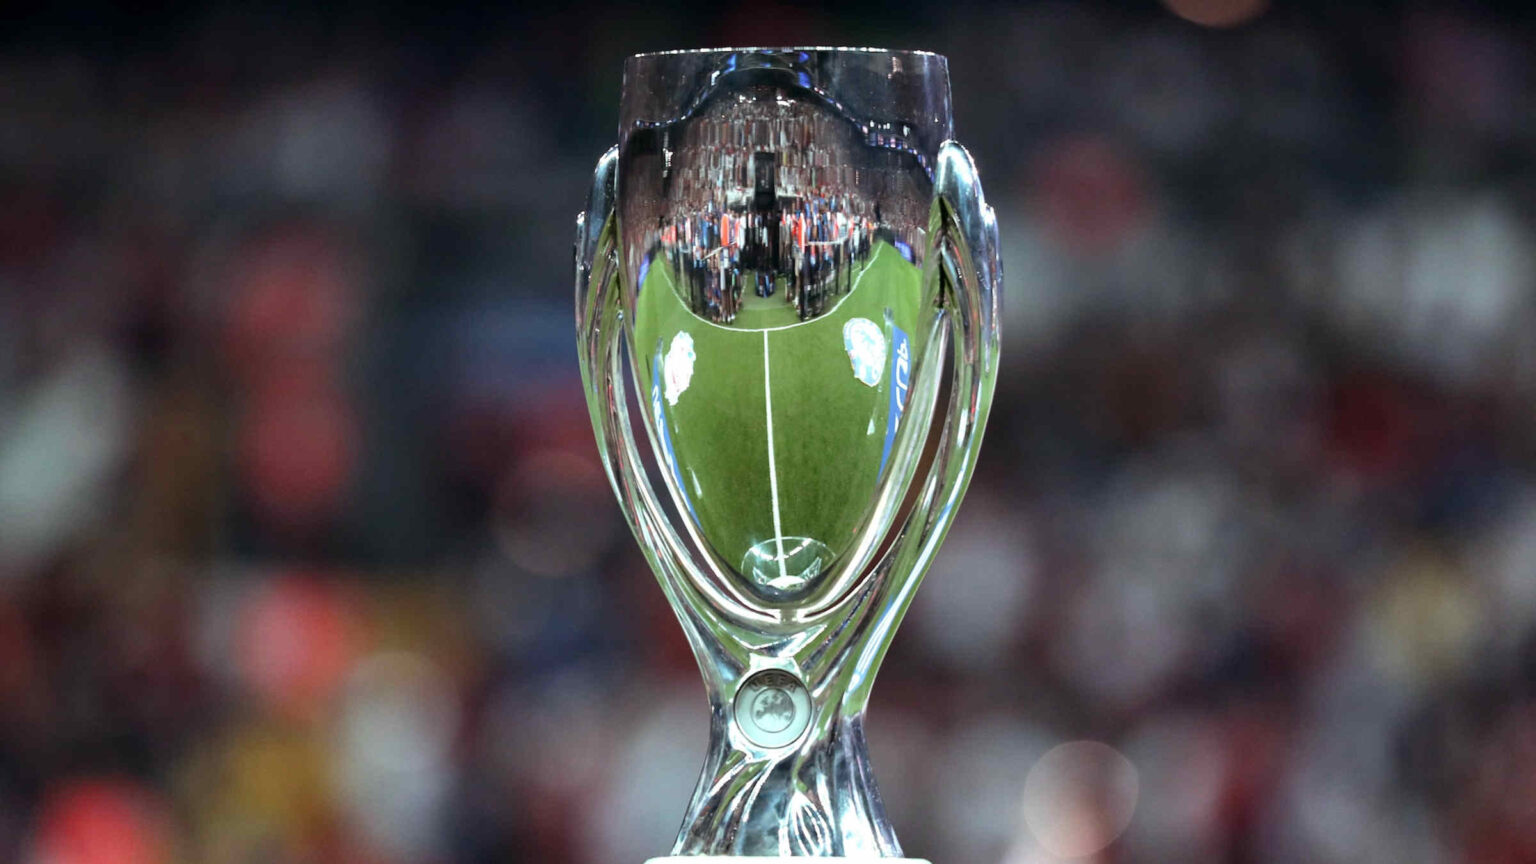 The UEFA Super Cup is set to be the first UEFA match to have spectators this season. Look for the competing teams to find the one you'll be rooting for.